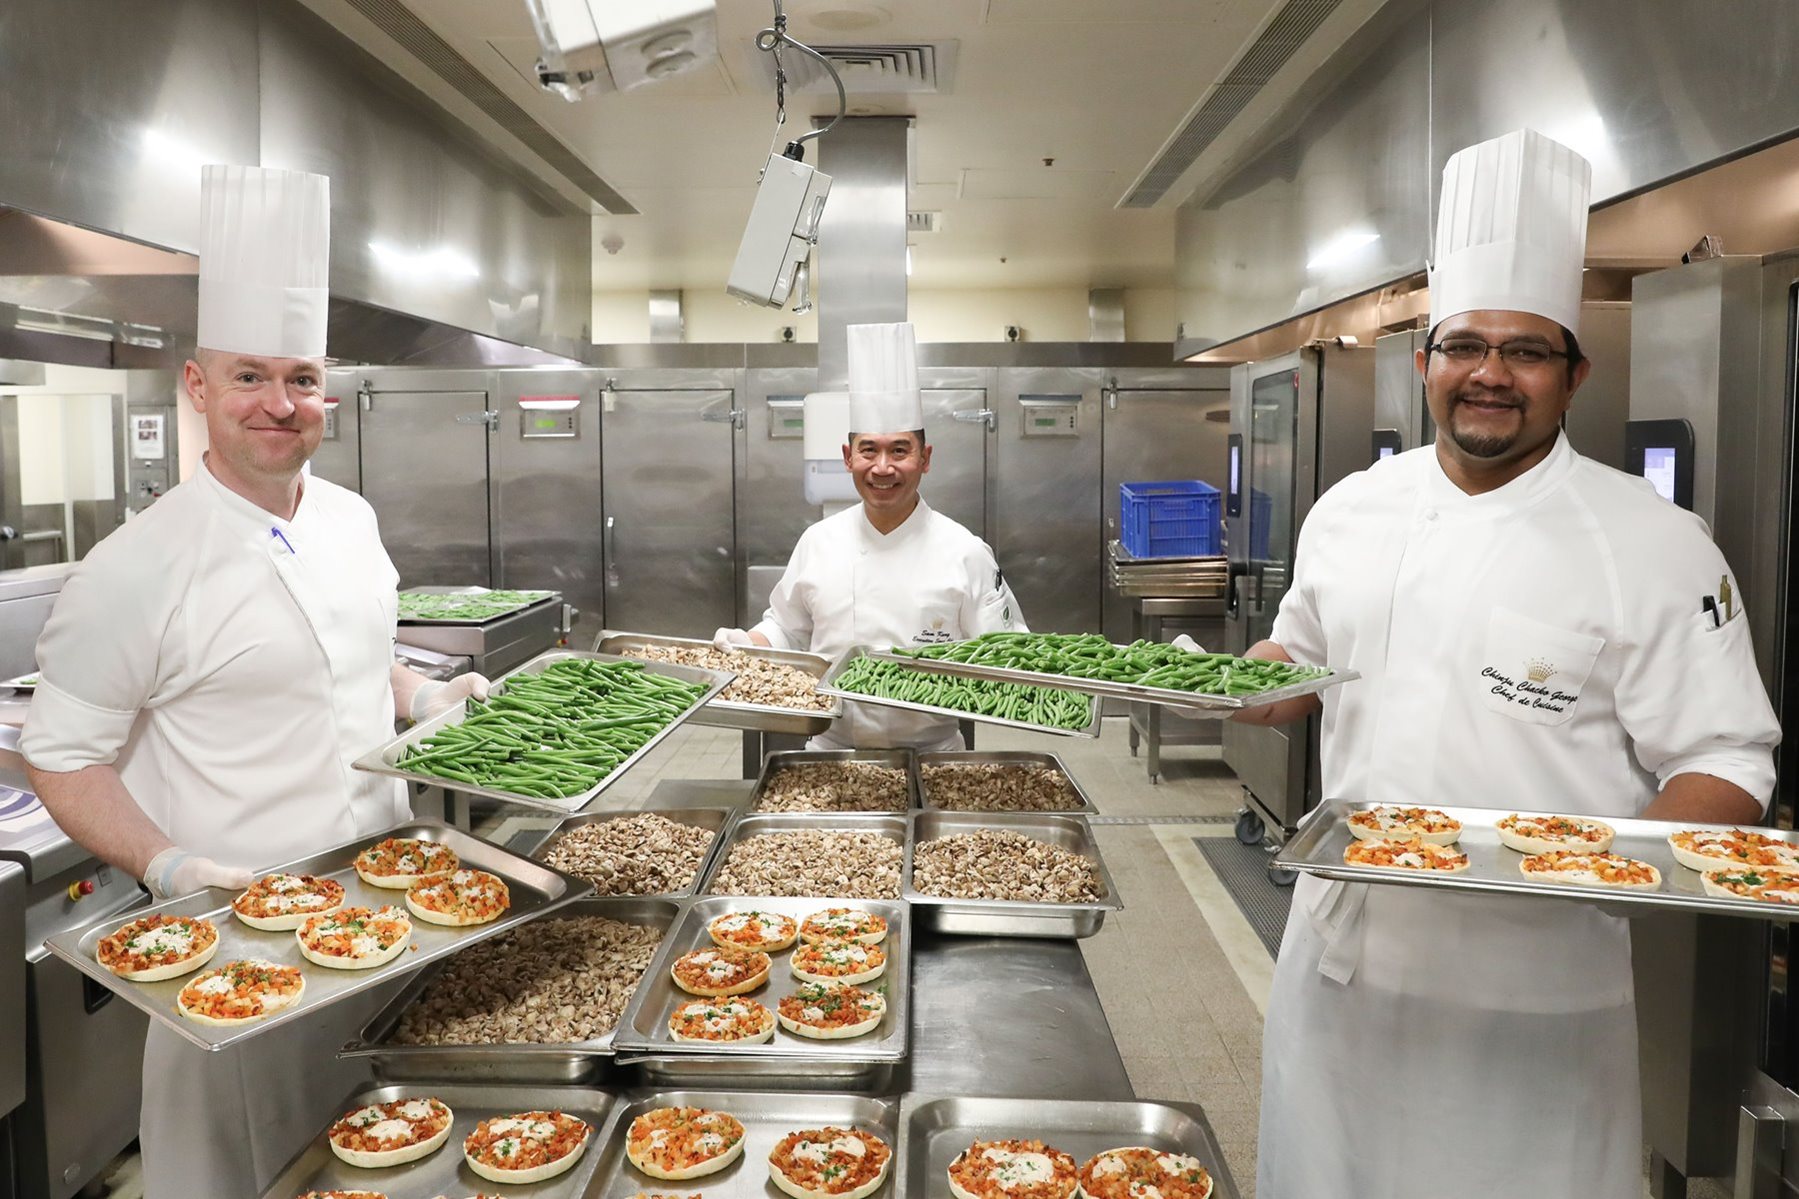 Crown Resort chefs holding food trays
